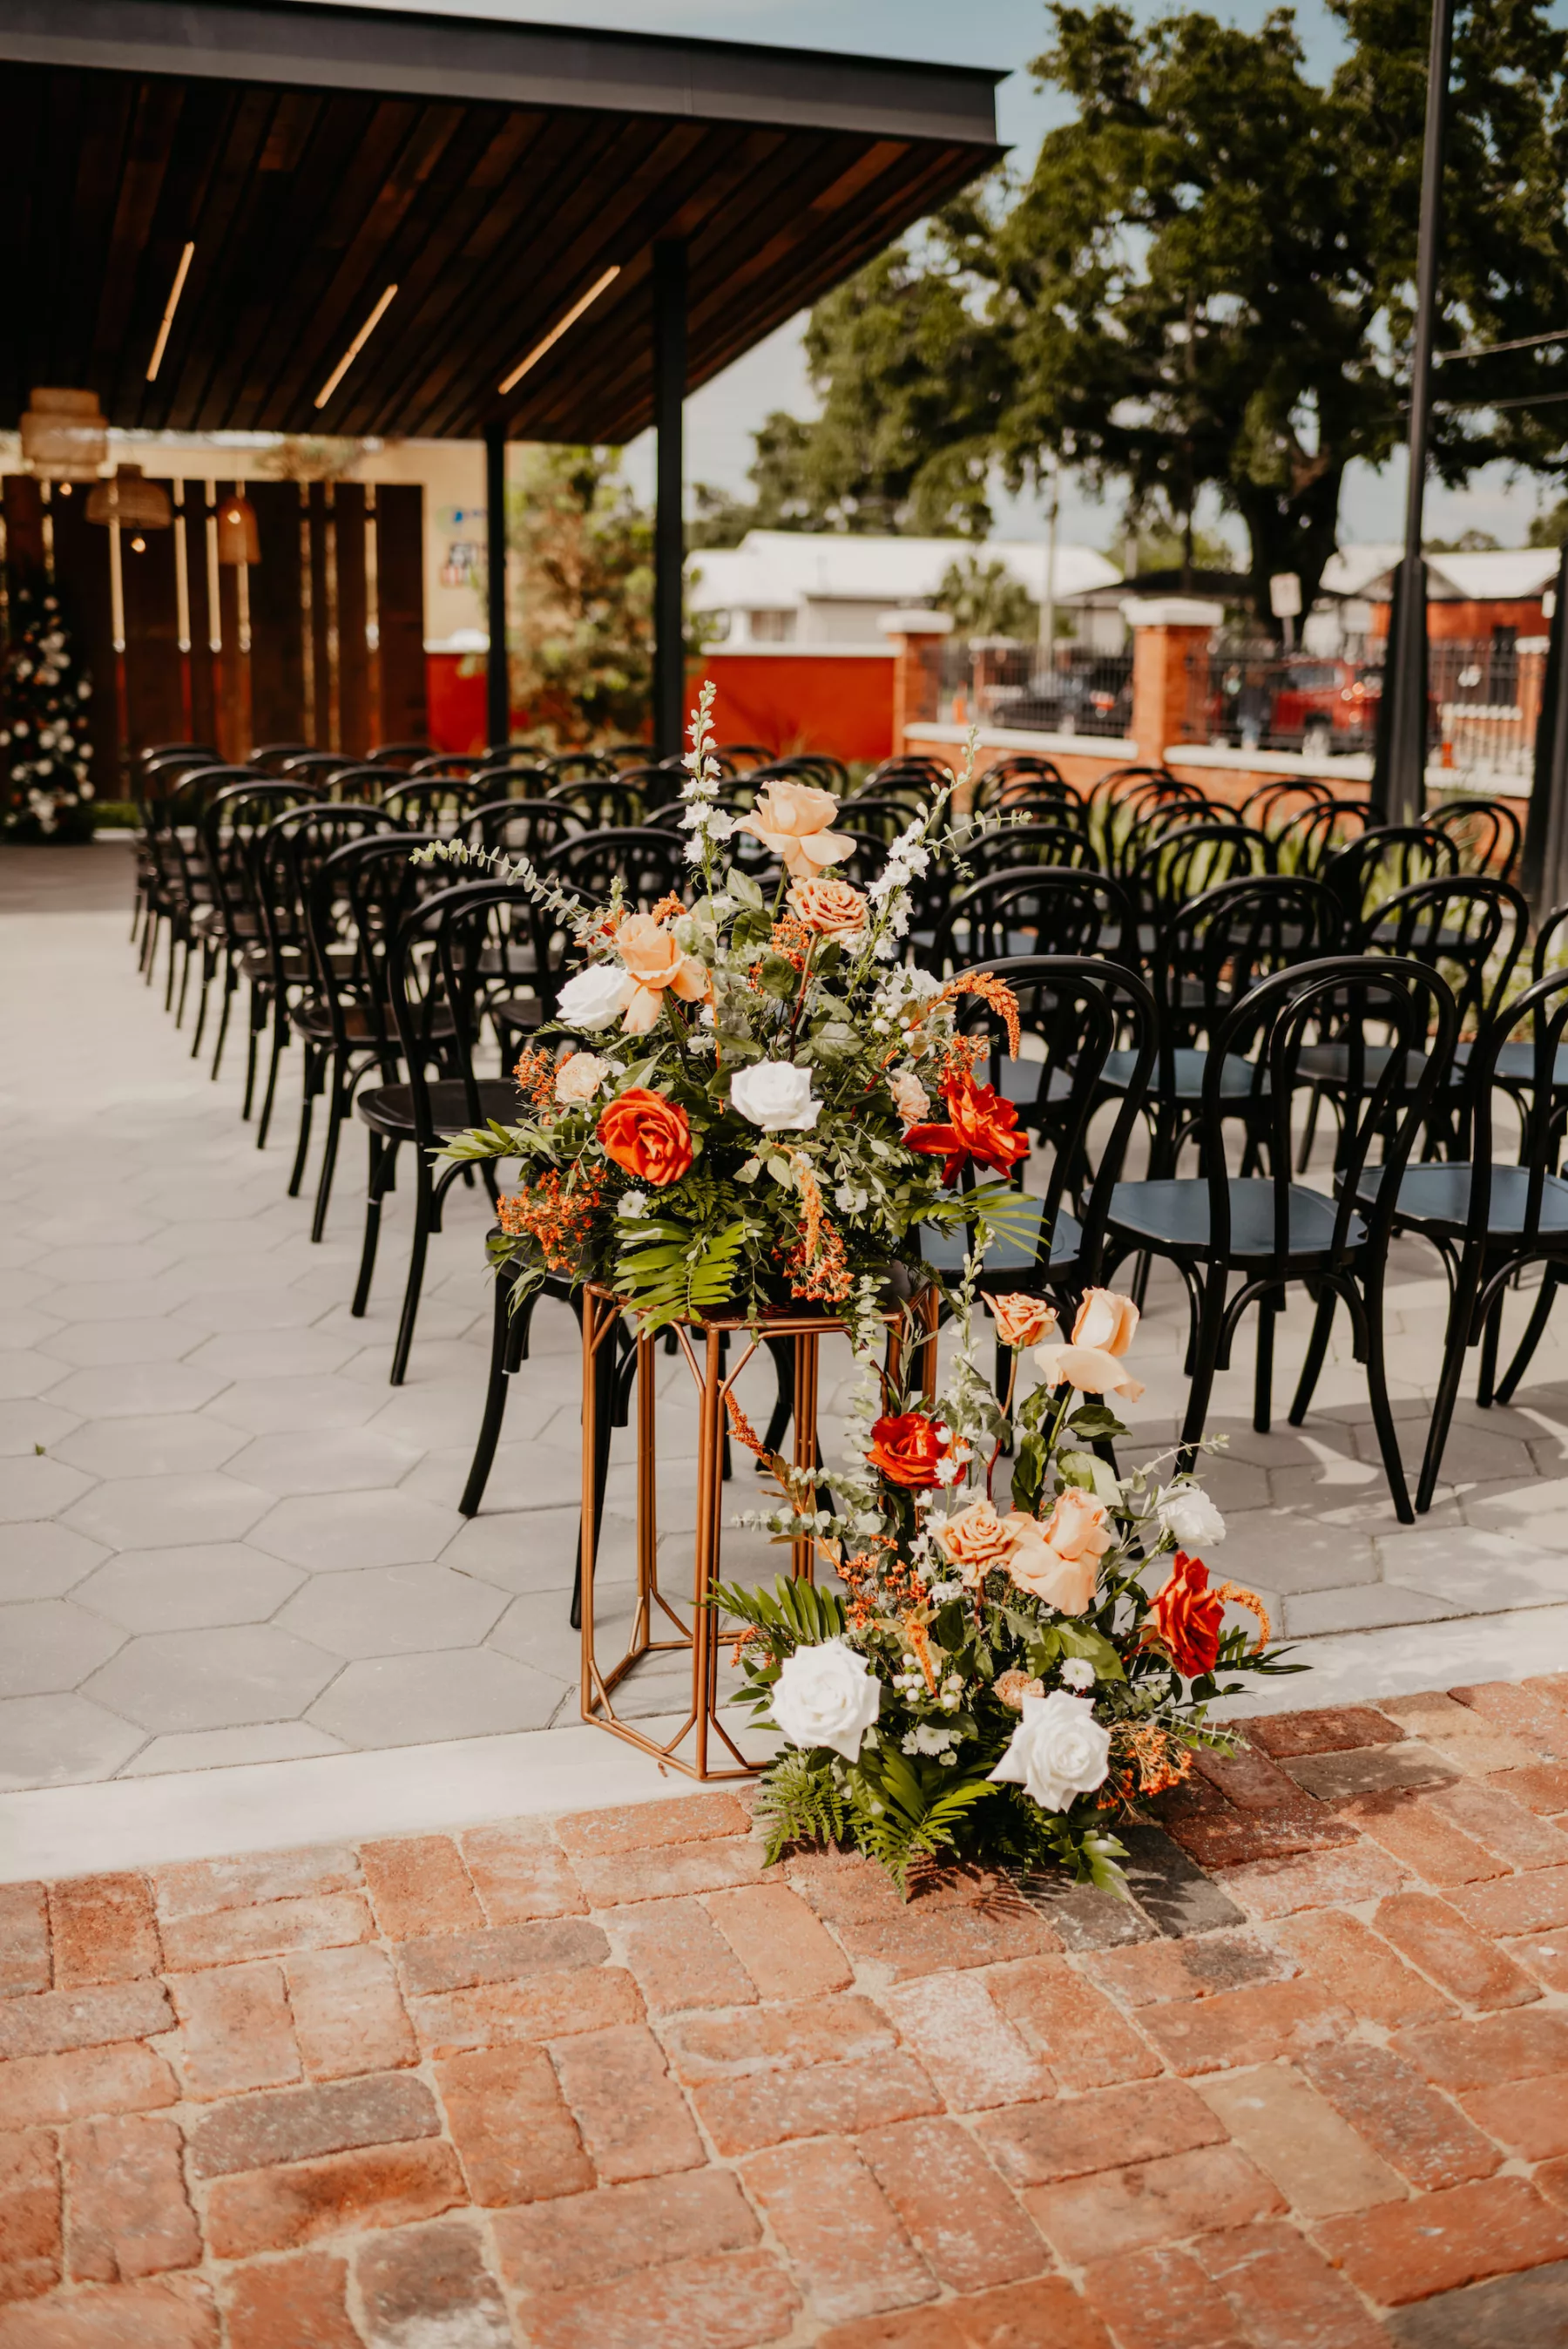 Terracotta, White, and Orange Roses, Greenery, Carnations, Snapdragon, and Greenery Aisle Decor for Outdoor Industrial Boho Wedding Ceremony Ideas | Tampa Courtyard Venue J.C. Newman Cigar Co.